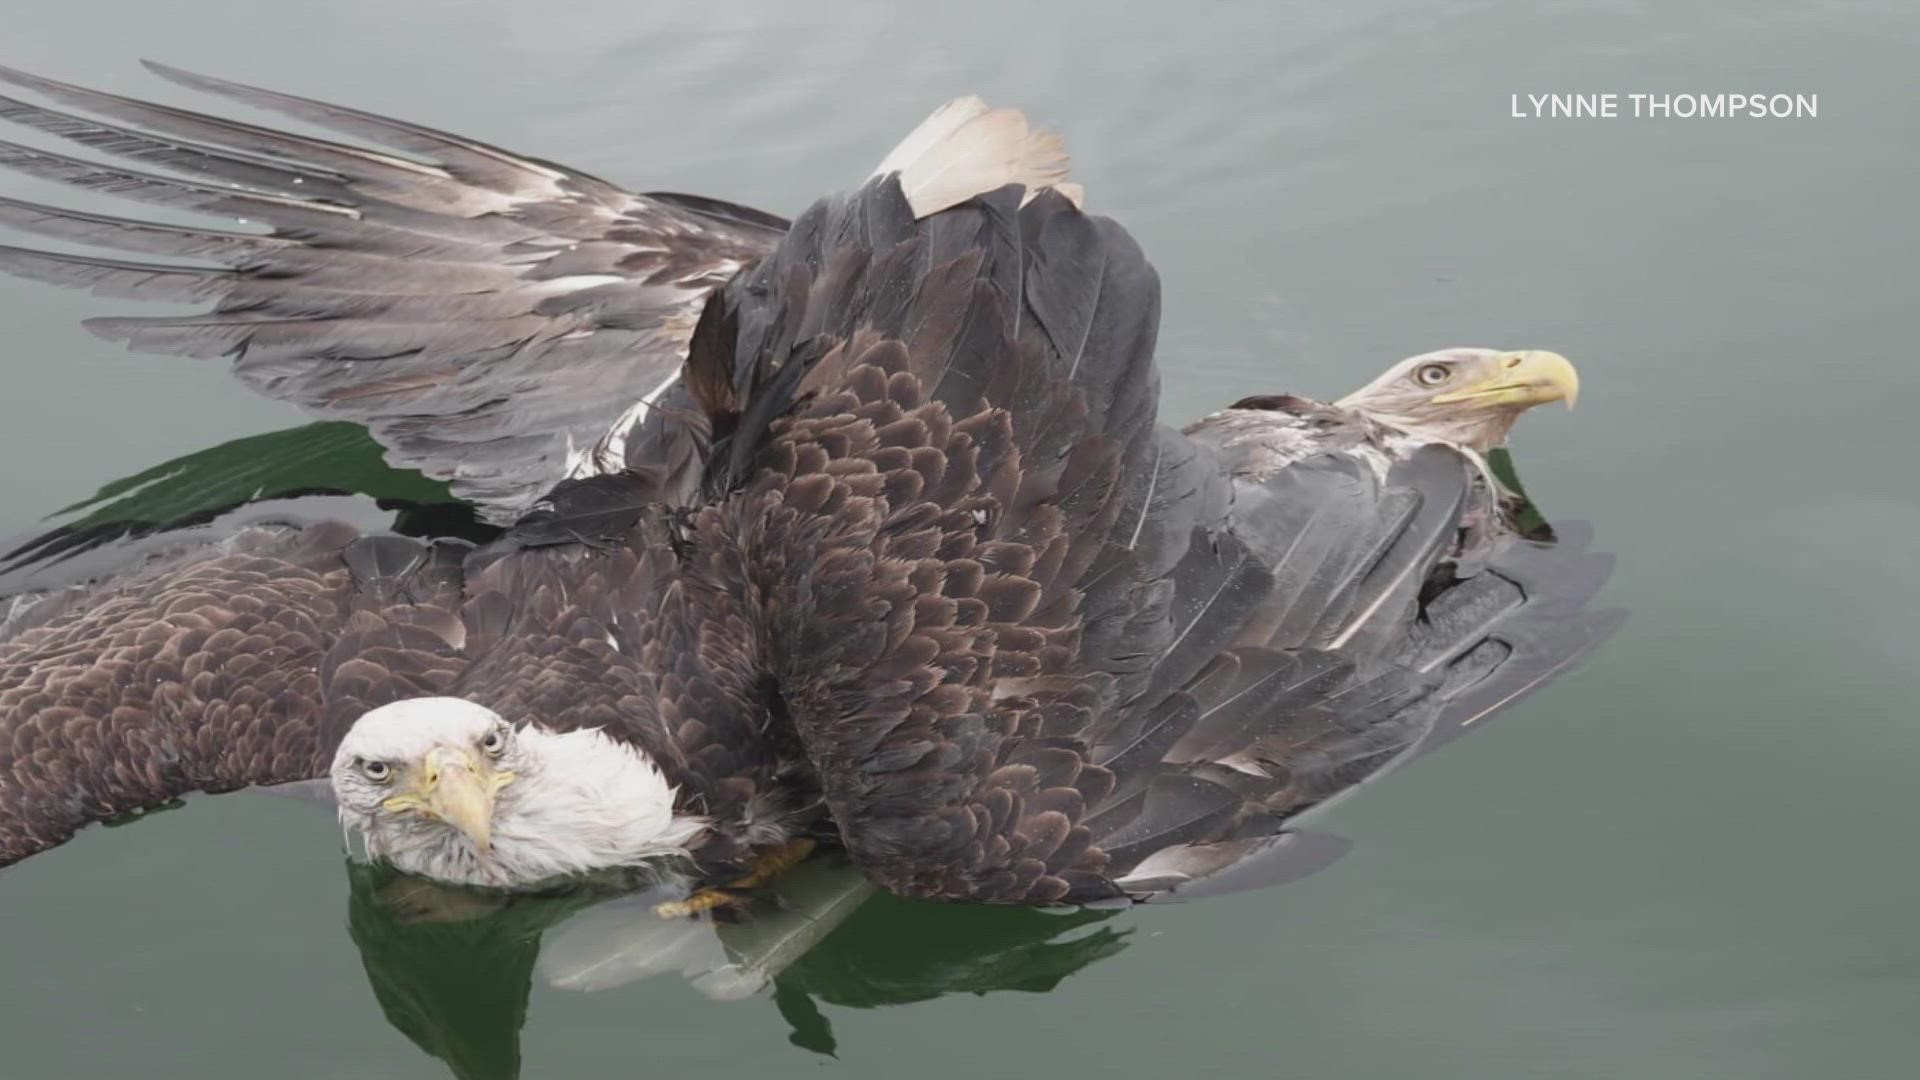 When Lynne Thompson and Scott Crockett reached the eagles, the birds weren't moving. Thompson said they were entangled, floating, stunned, and tired — but alive.